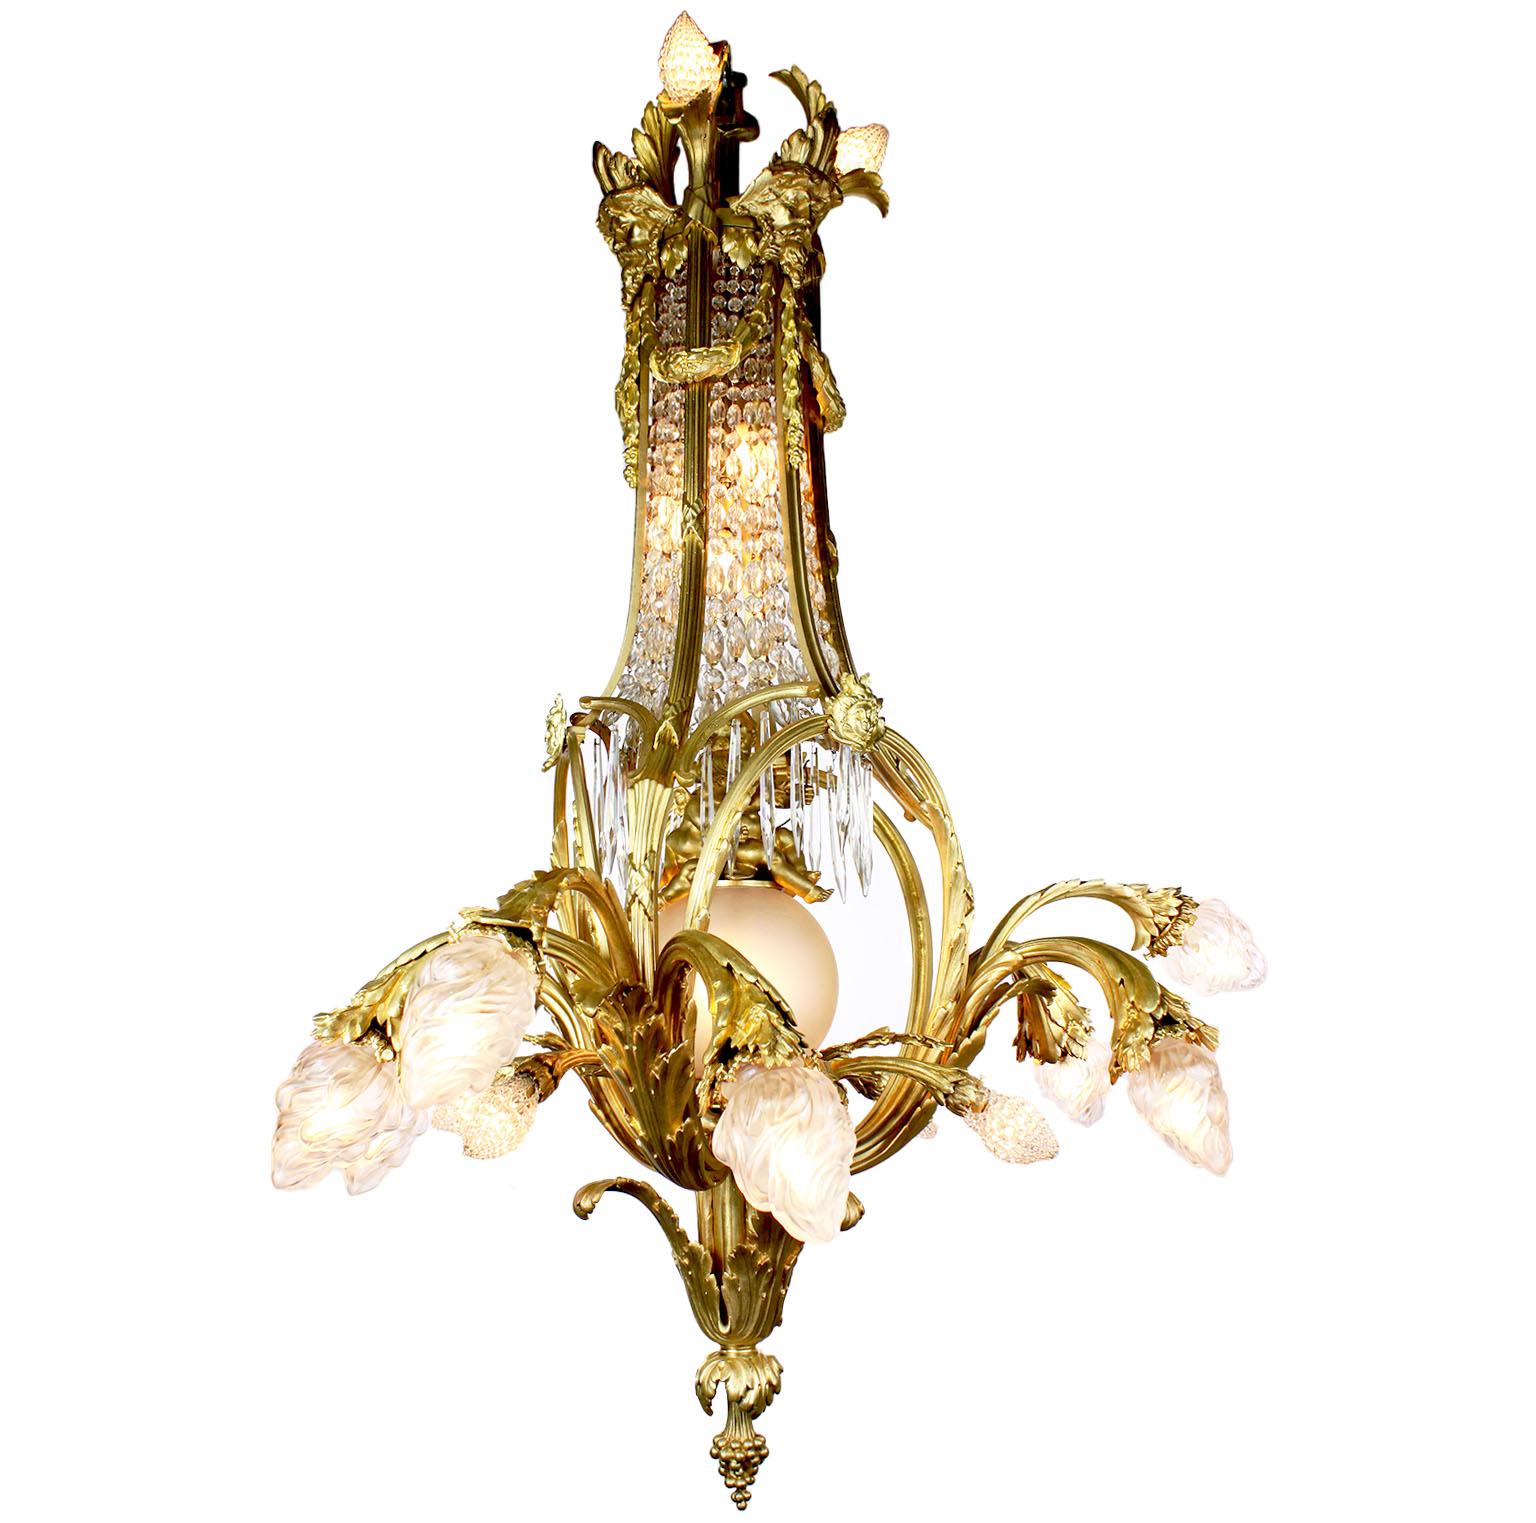 A large and rare French Belle Époque gilt bronze and cut-glass twenty-four light figural chandelier. The elongated gilt bronze frame with scrolled floral arms protruding from the lower section with frosted glass shades and beaded glass bulb covers;